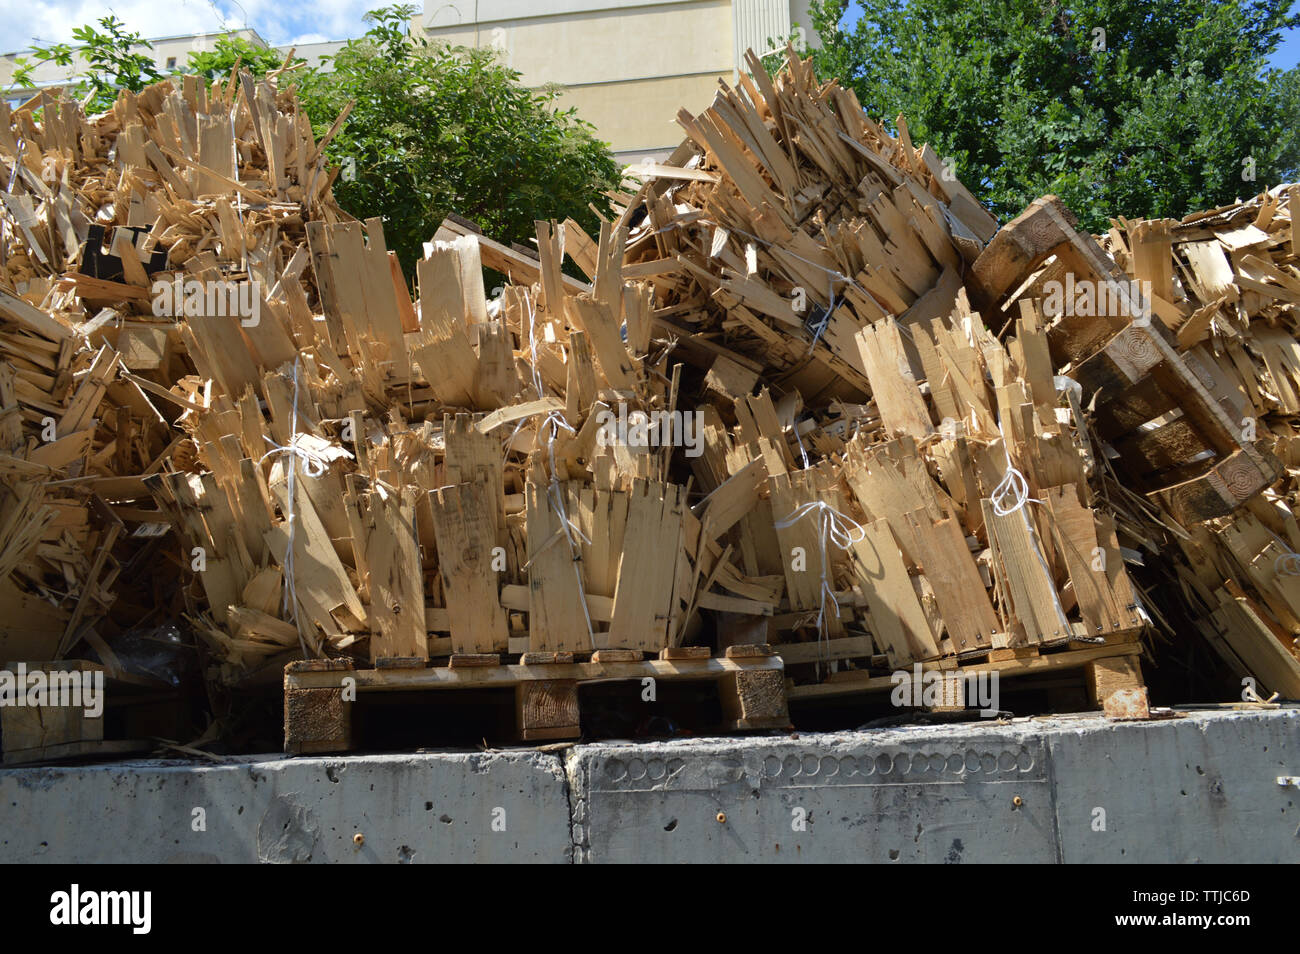 Fire Wood on the containers box for the Free Fire Stock Photo